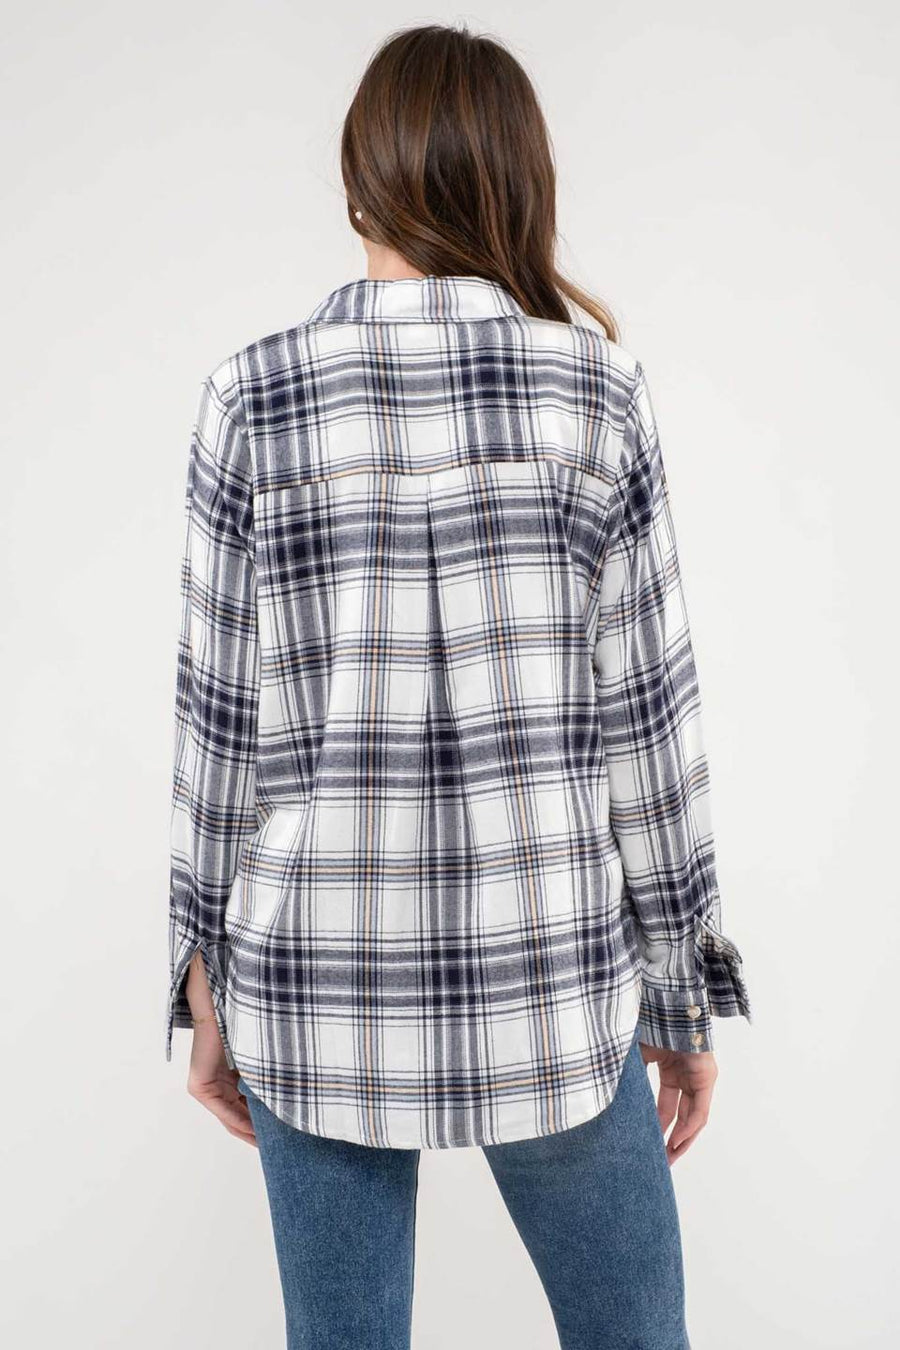 Payton Plaid Lightweight Long Sleeve Top (Only Small Left) *FINAL SALE*